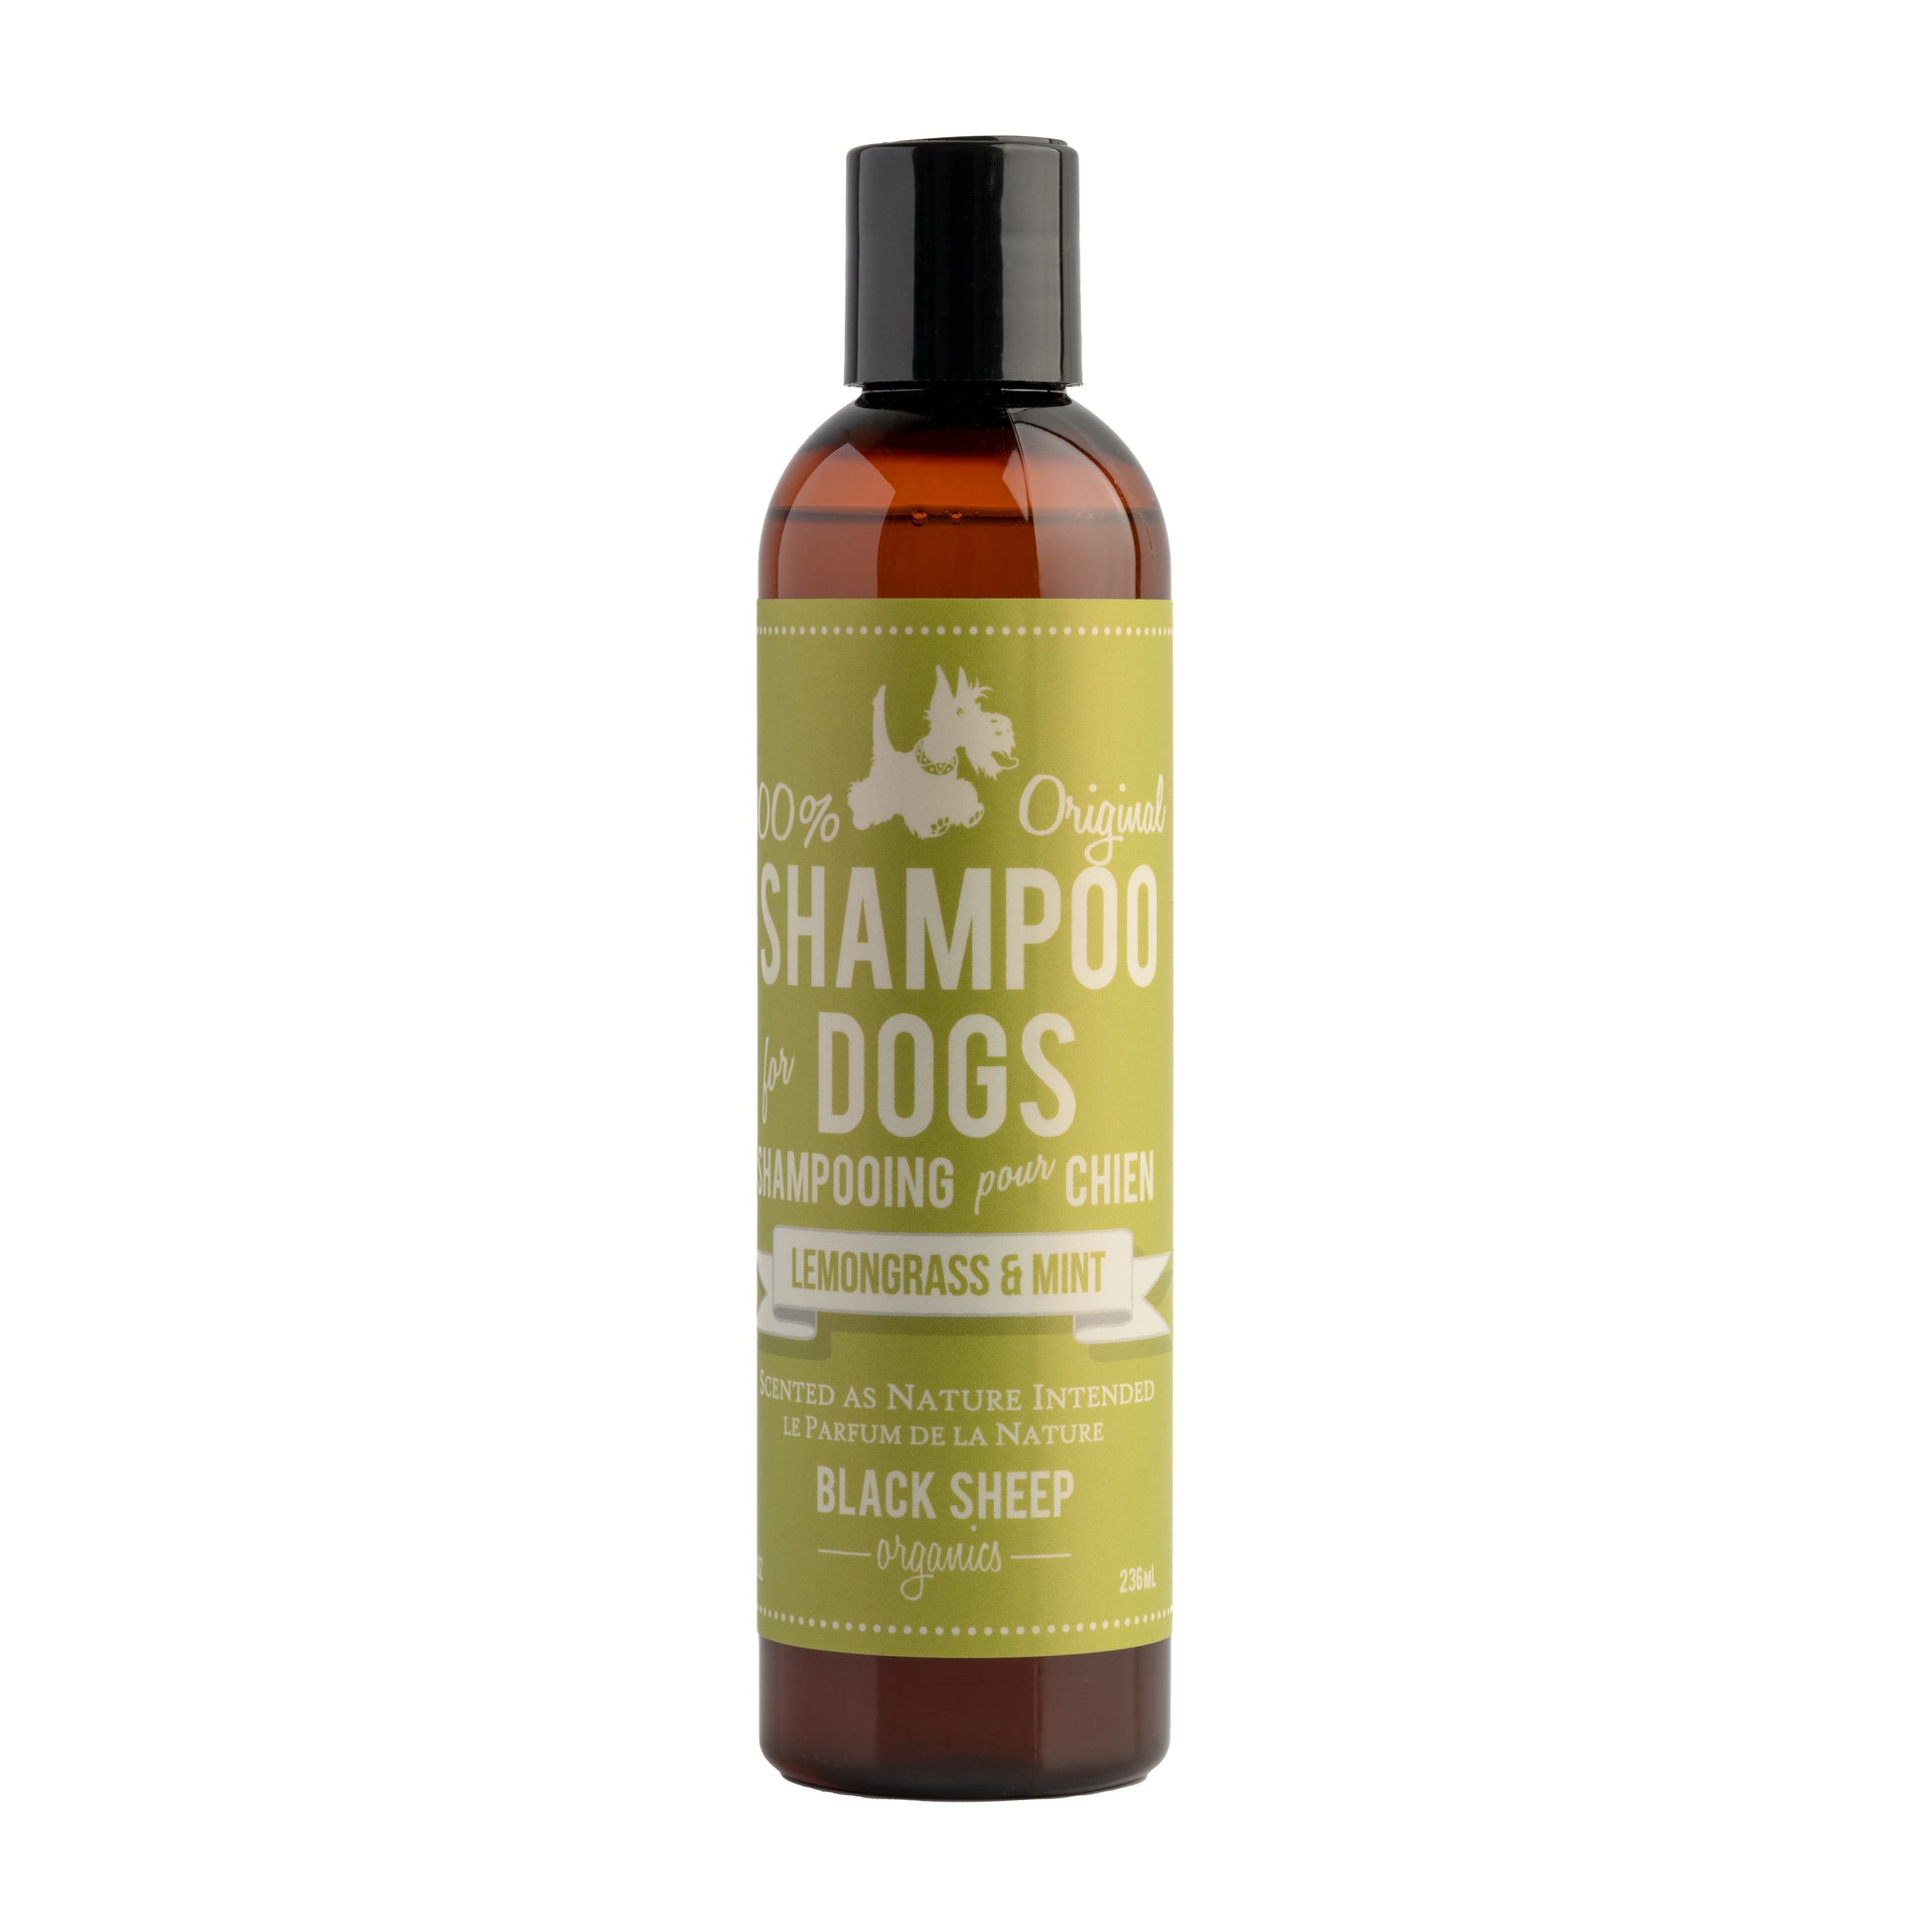 LEMONGRASS & MINT - Refreshing for Itchy Skin of Active Dogs